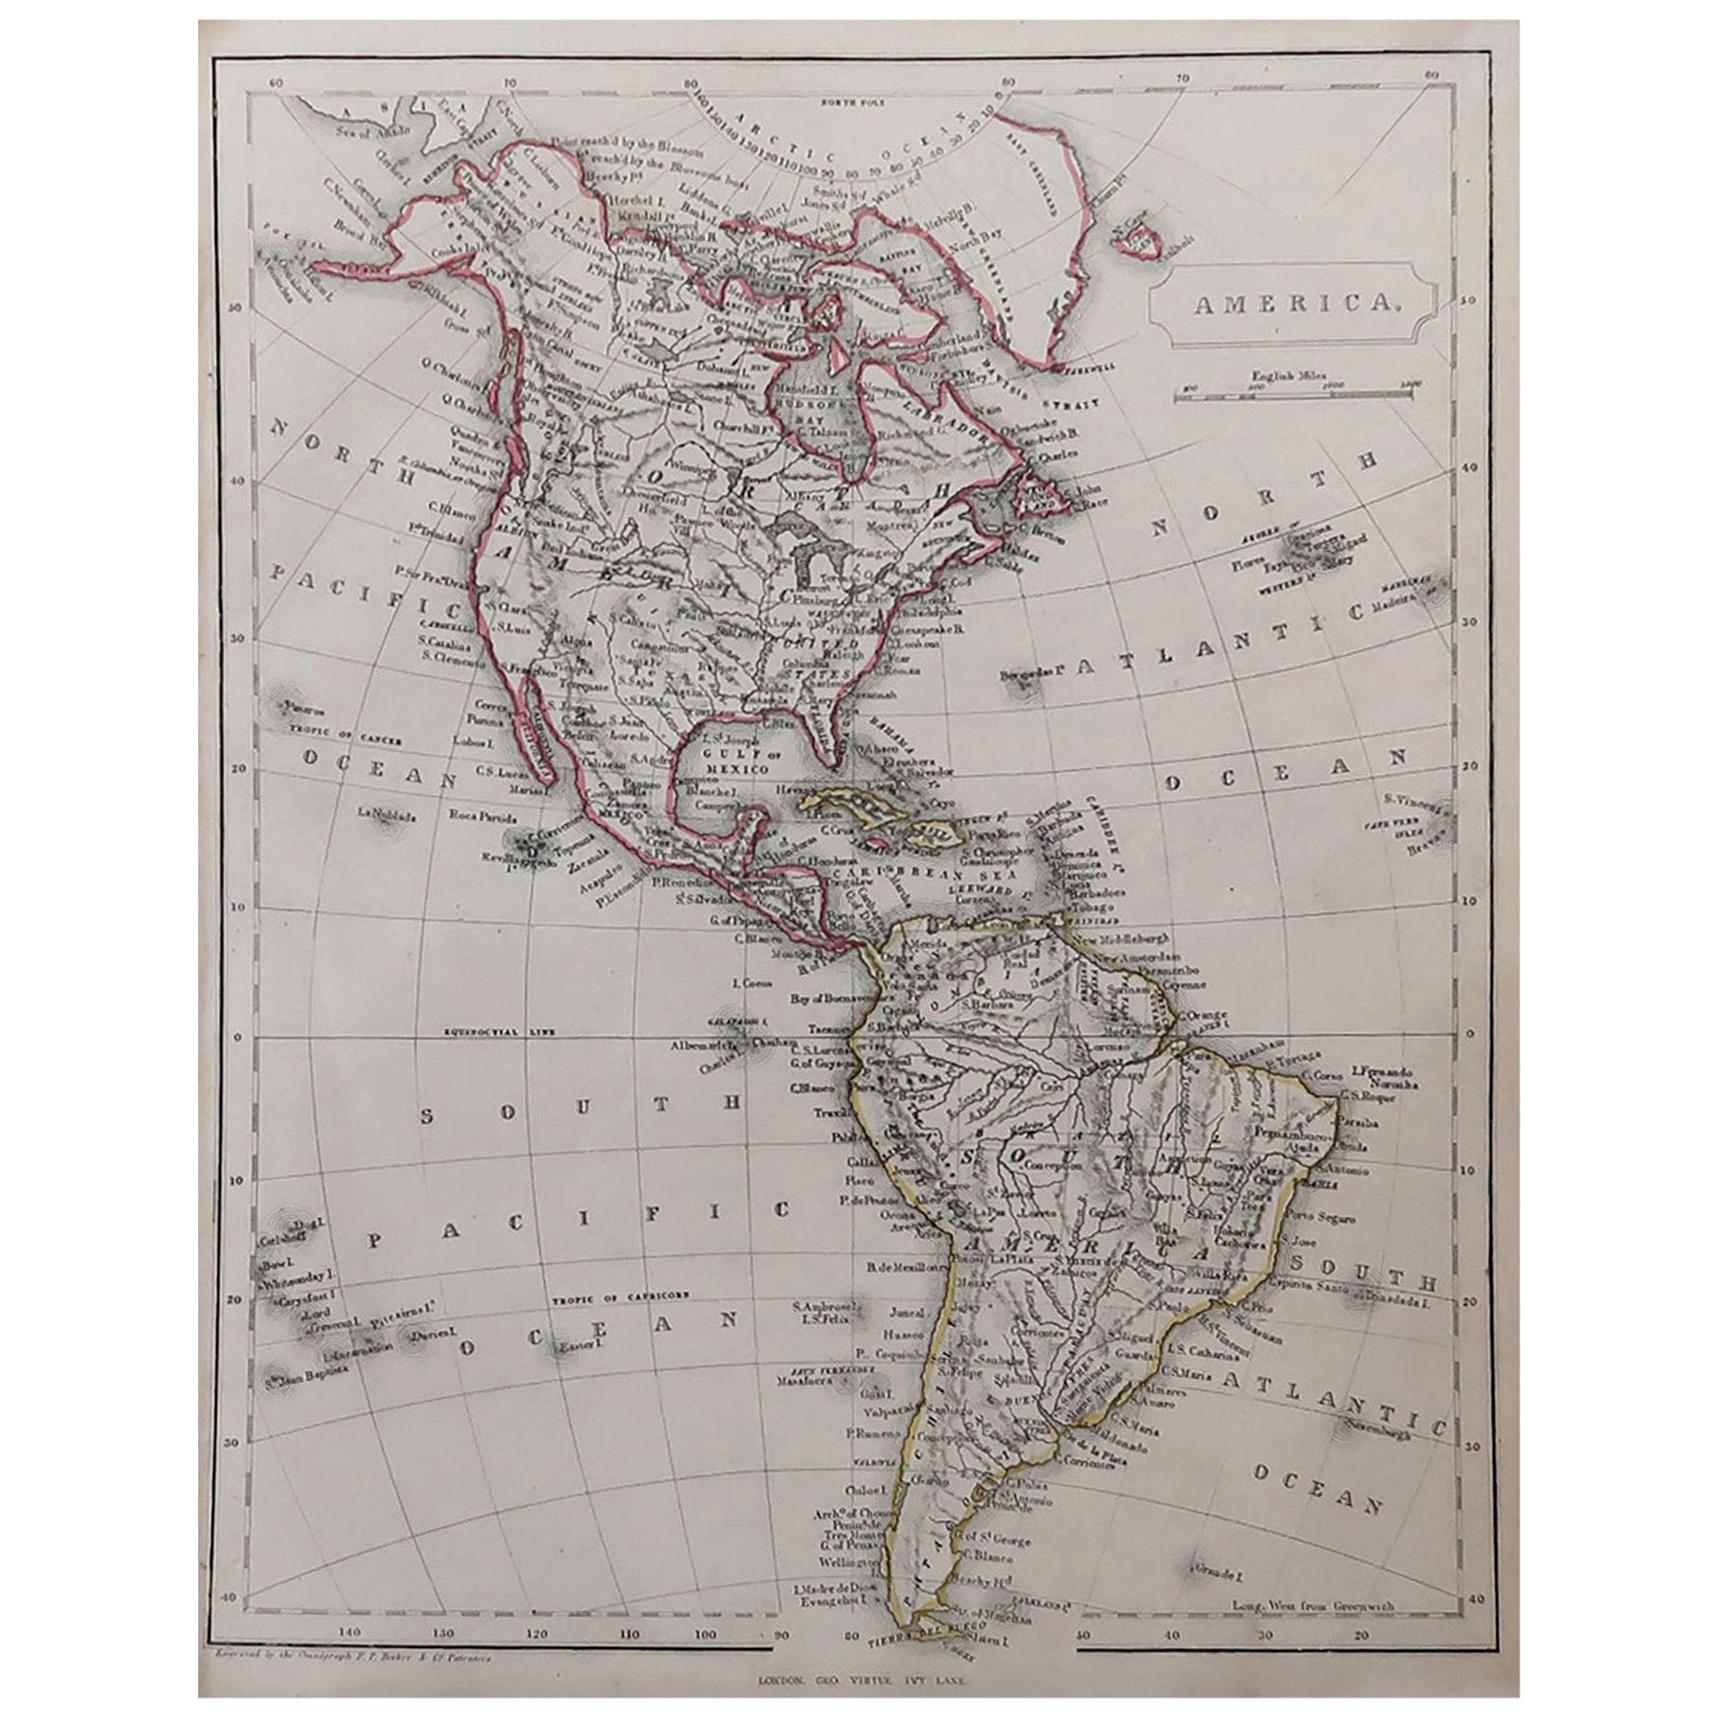 Original Antique Map of North and South America by Becker, circa 1840